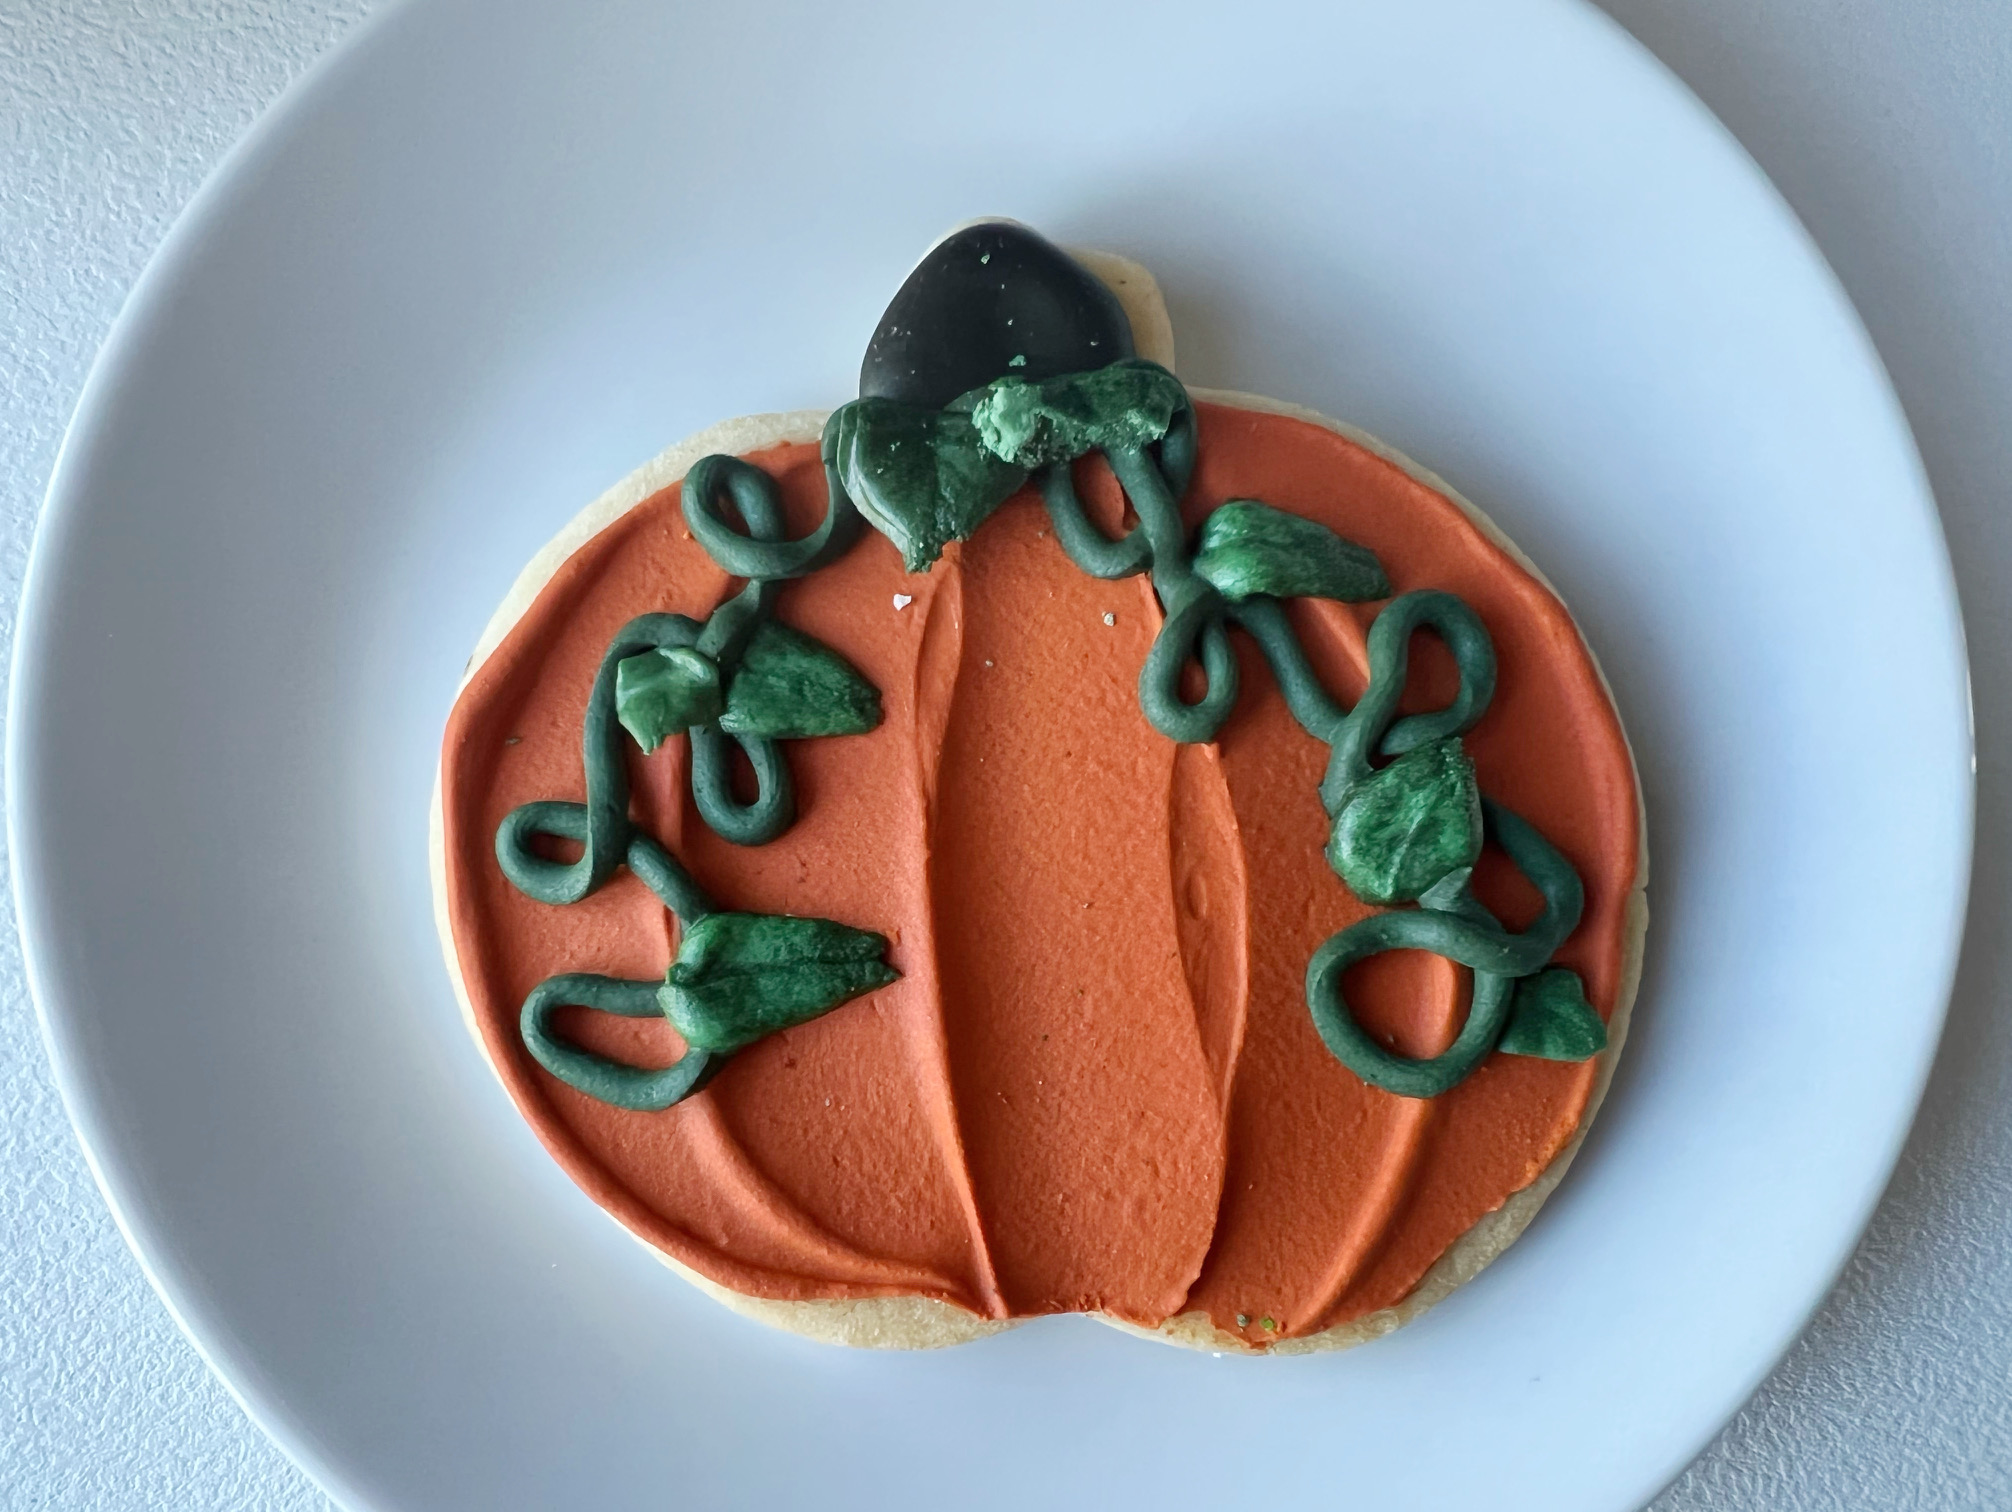 On a white circular plate, there is a pumpkin cookie from Central Illinois Bakehouse. Photo by Alyssa Buckley.